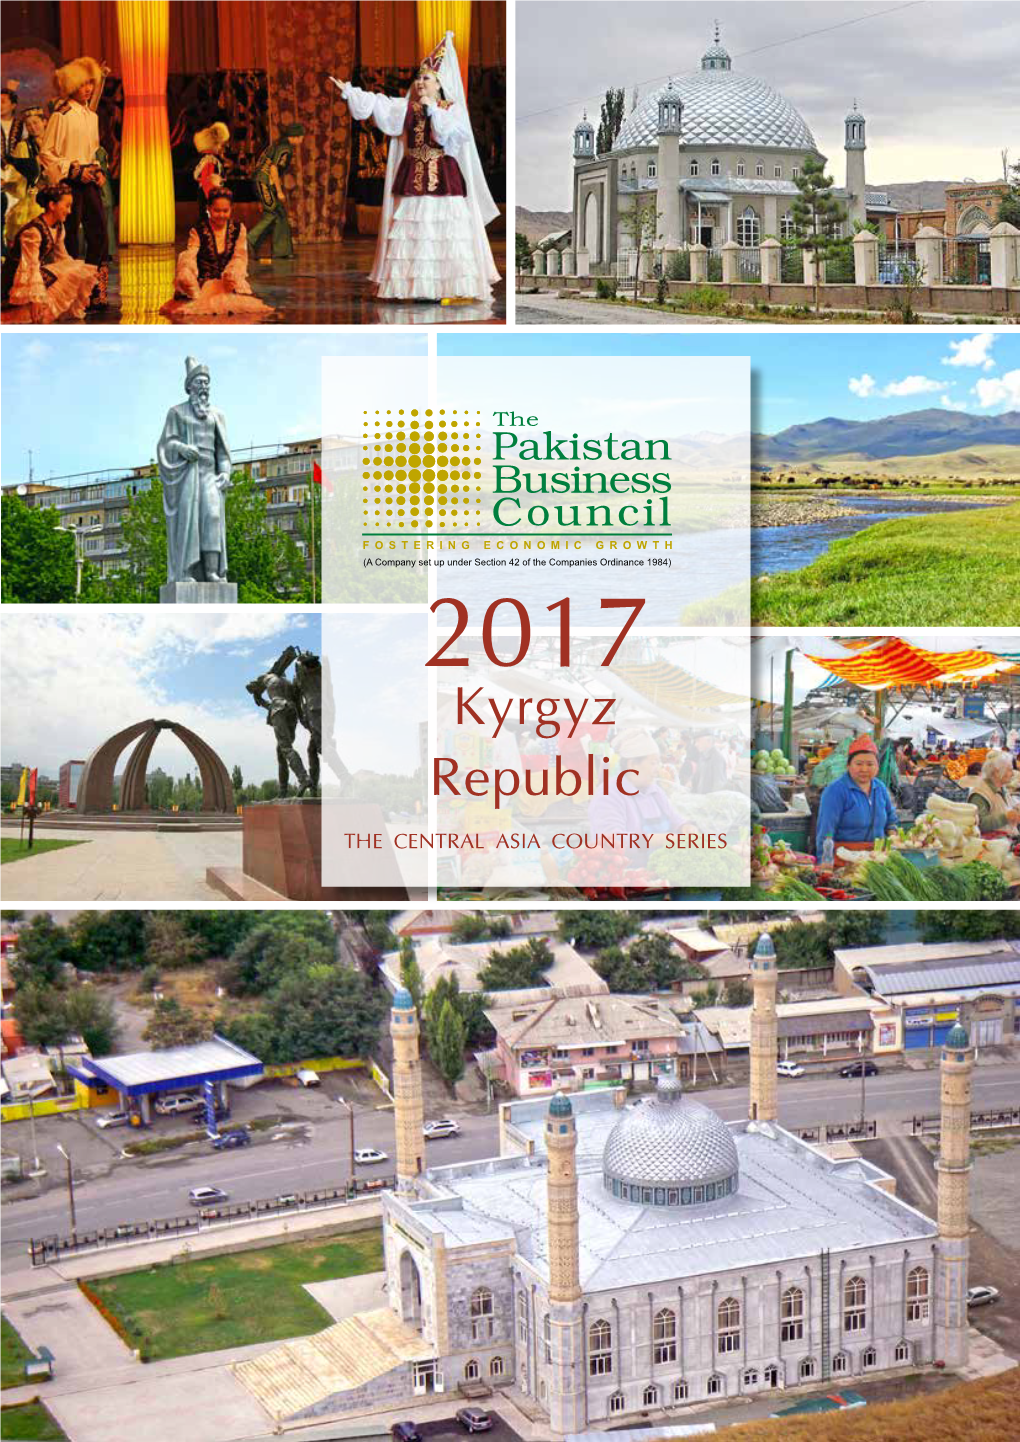 2017 Kyrgyz Republic the CENTRAL ASIA COUNTRY SERIES